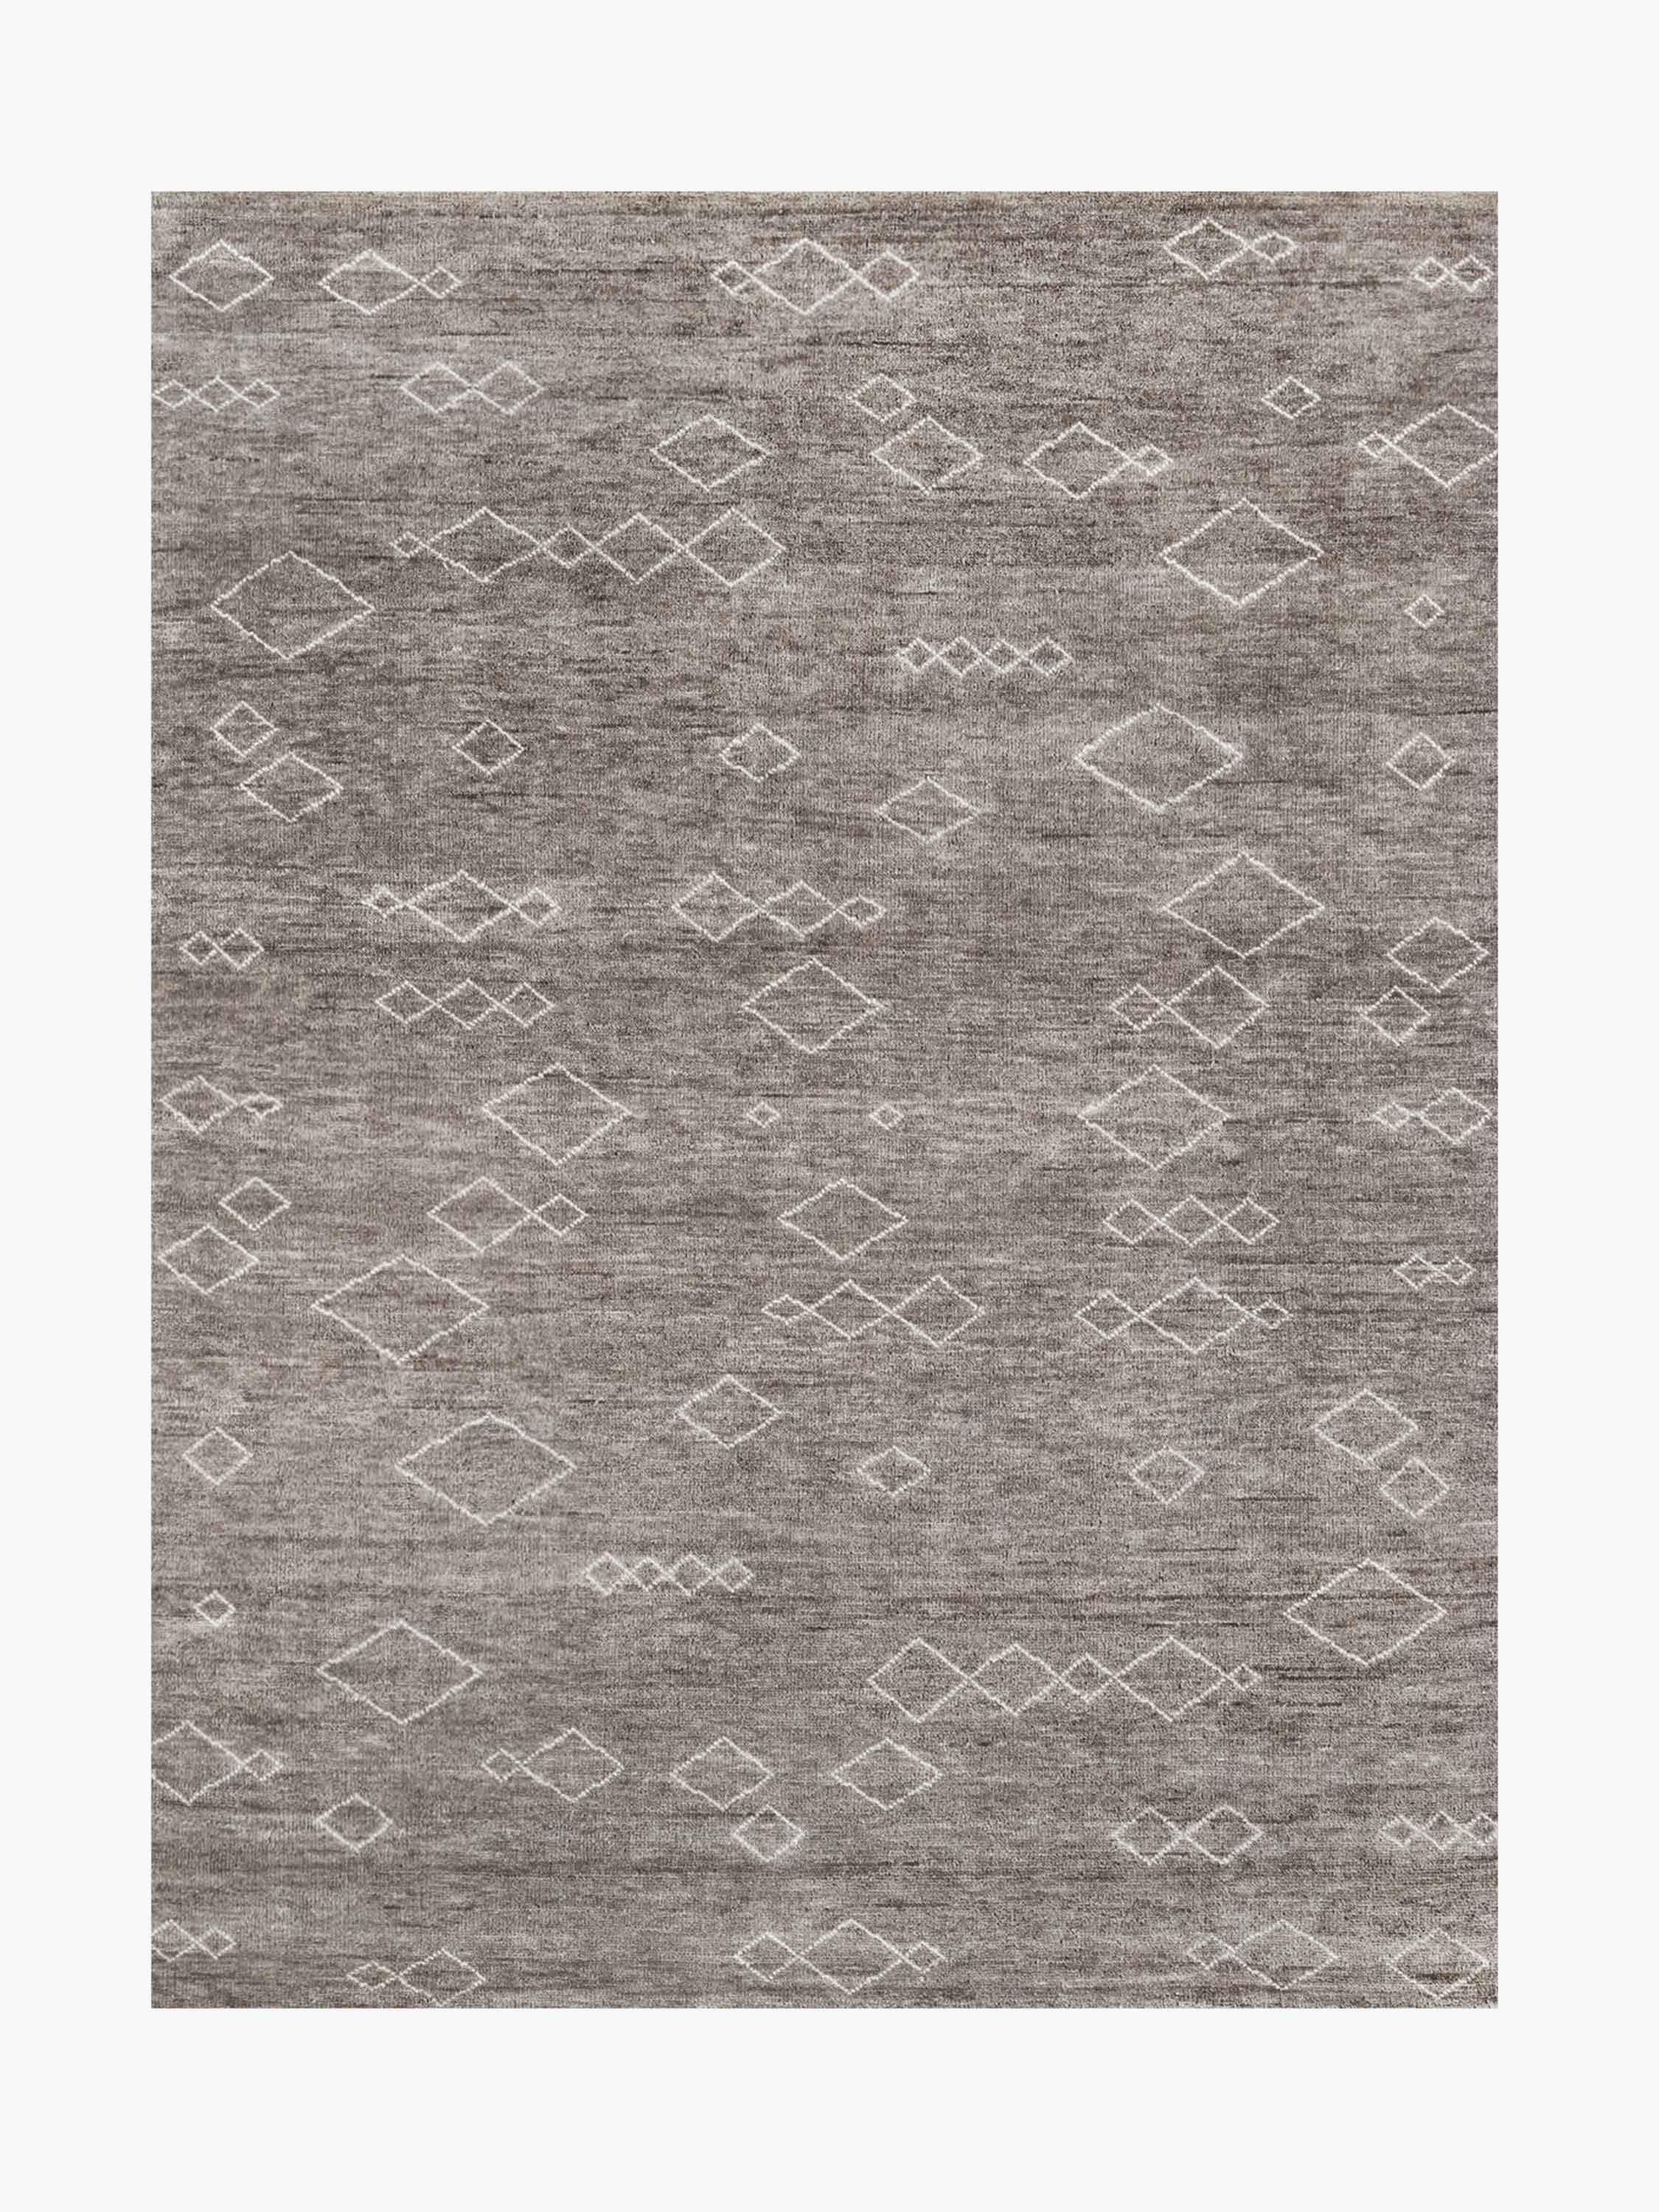 For Sale: Gray (Graphite/Sand) Ben Soleimani Arisa Rug– Moroccan Hand-knotted Plush Wool Carbon/Mist 9'x12'